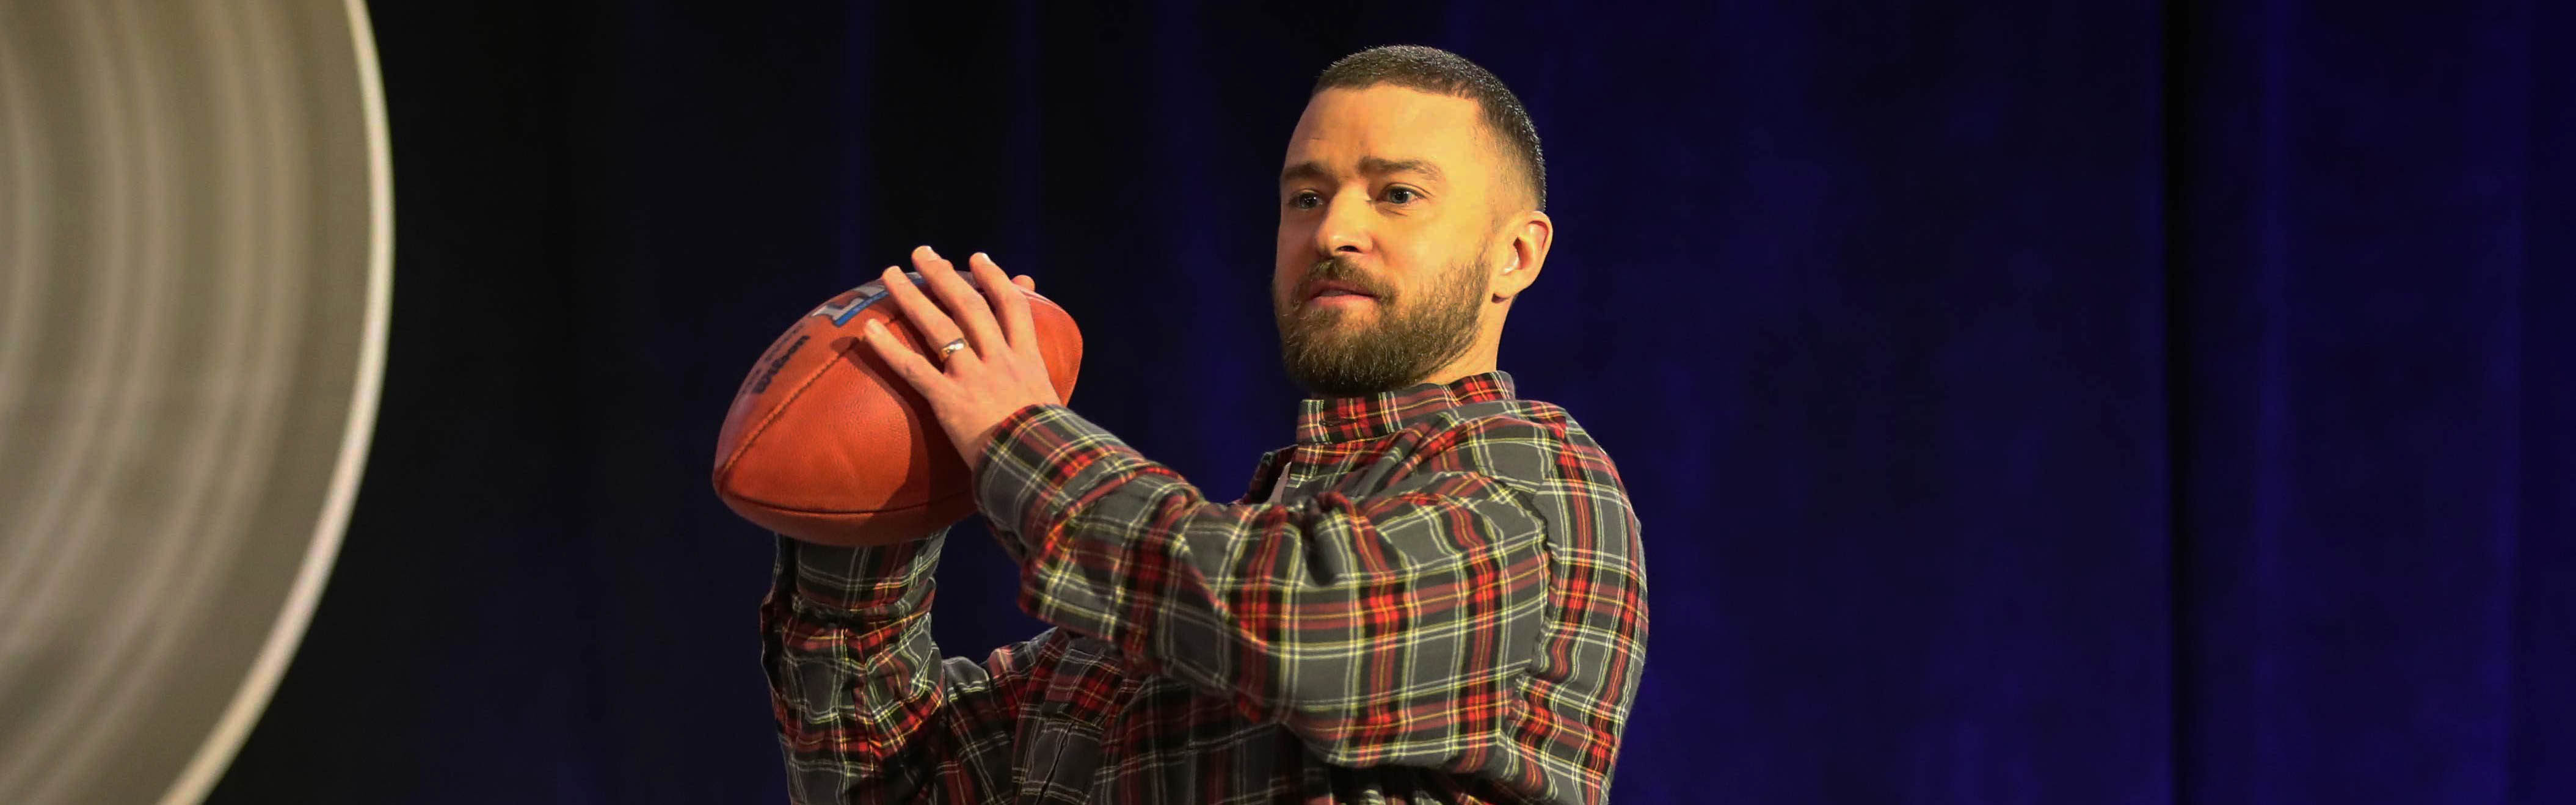 Justin-Timberlake-2018-Super-Bowl-Halftime-Show-Conference-February-01-2018-1